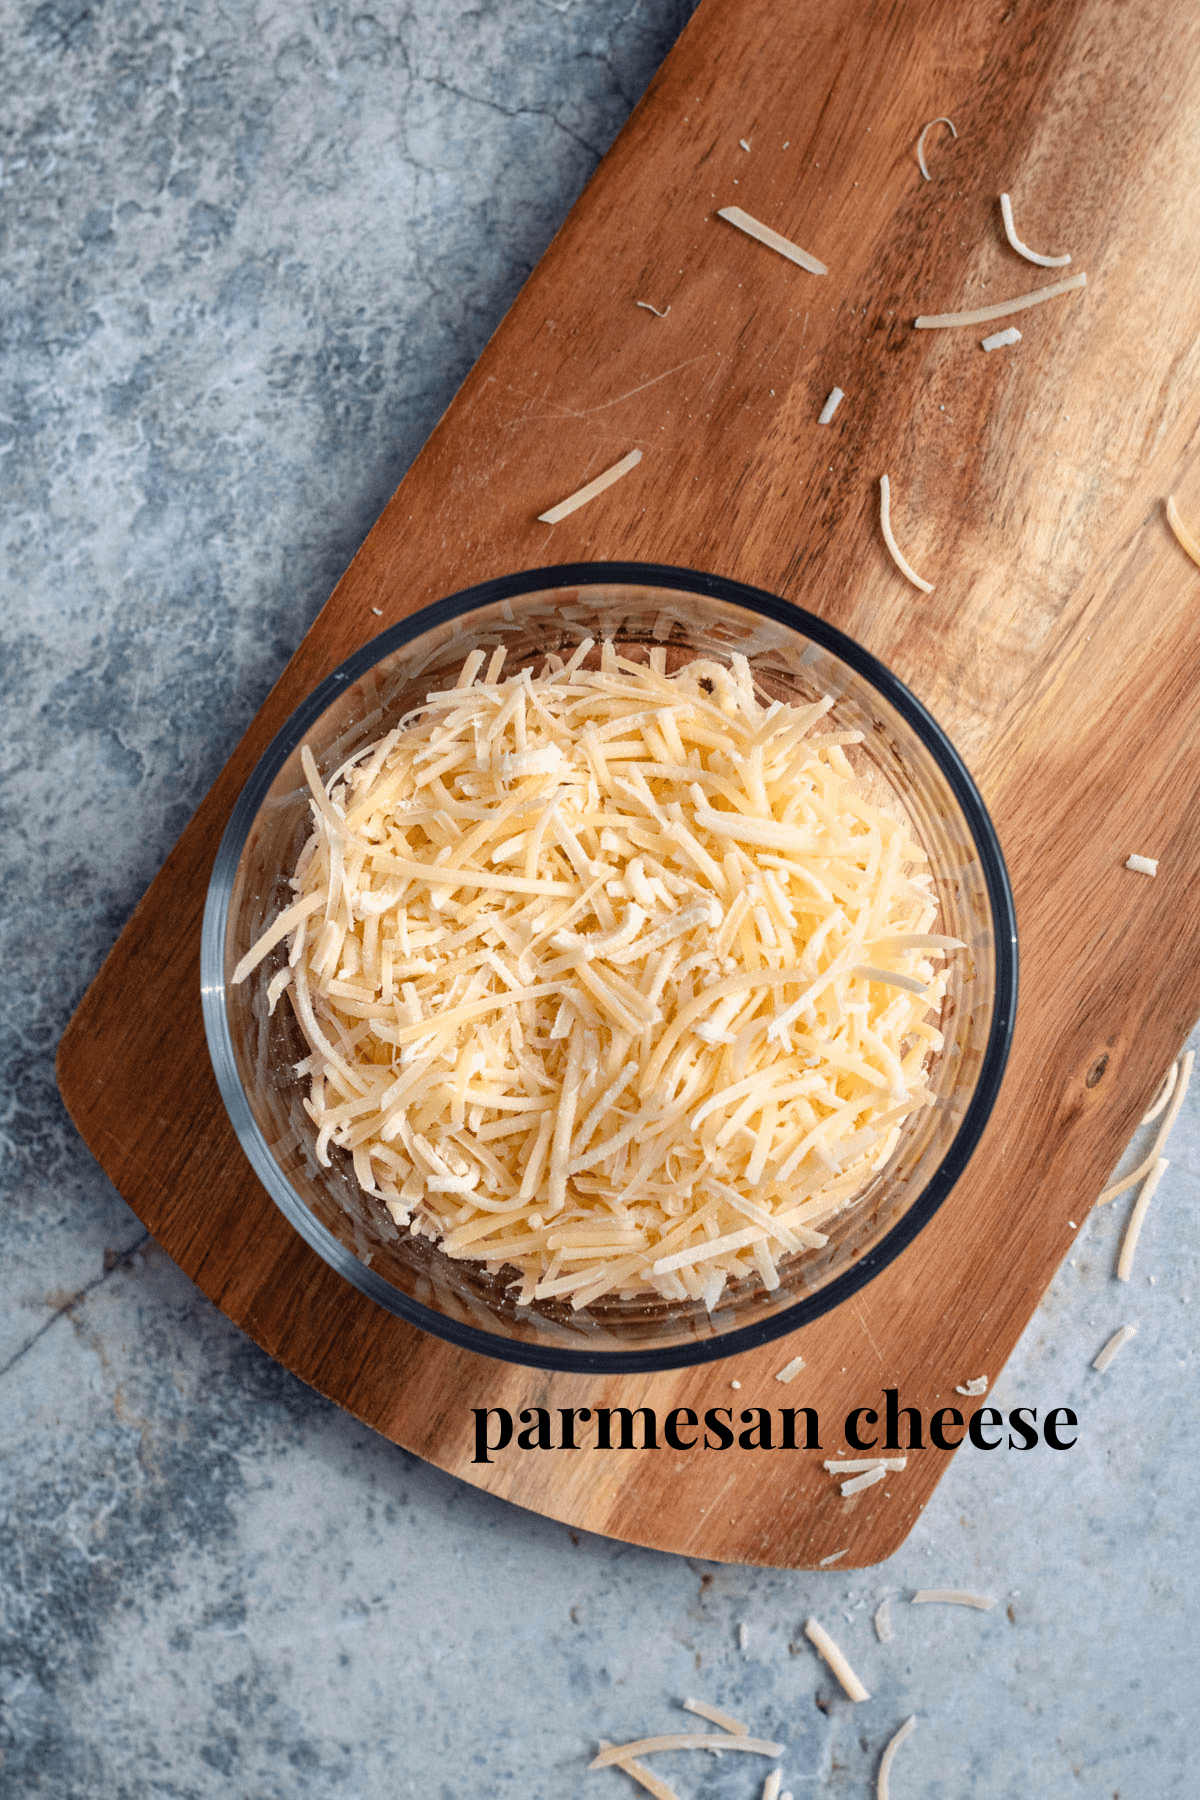 parmesan cheese in a glass bowl with a light colored background